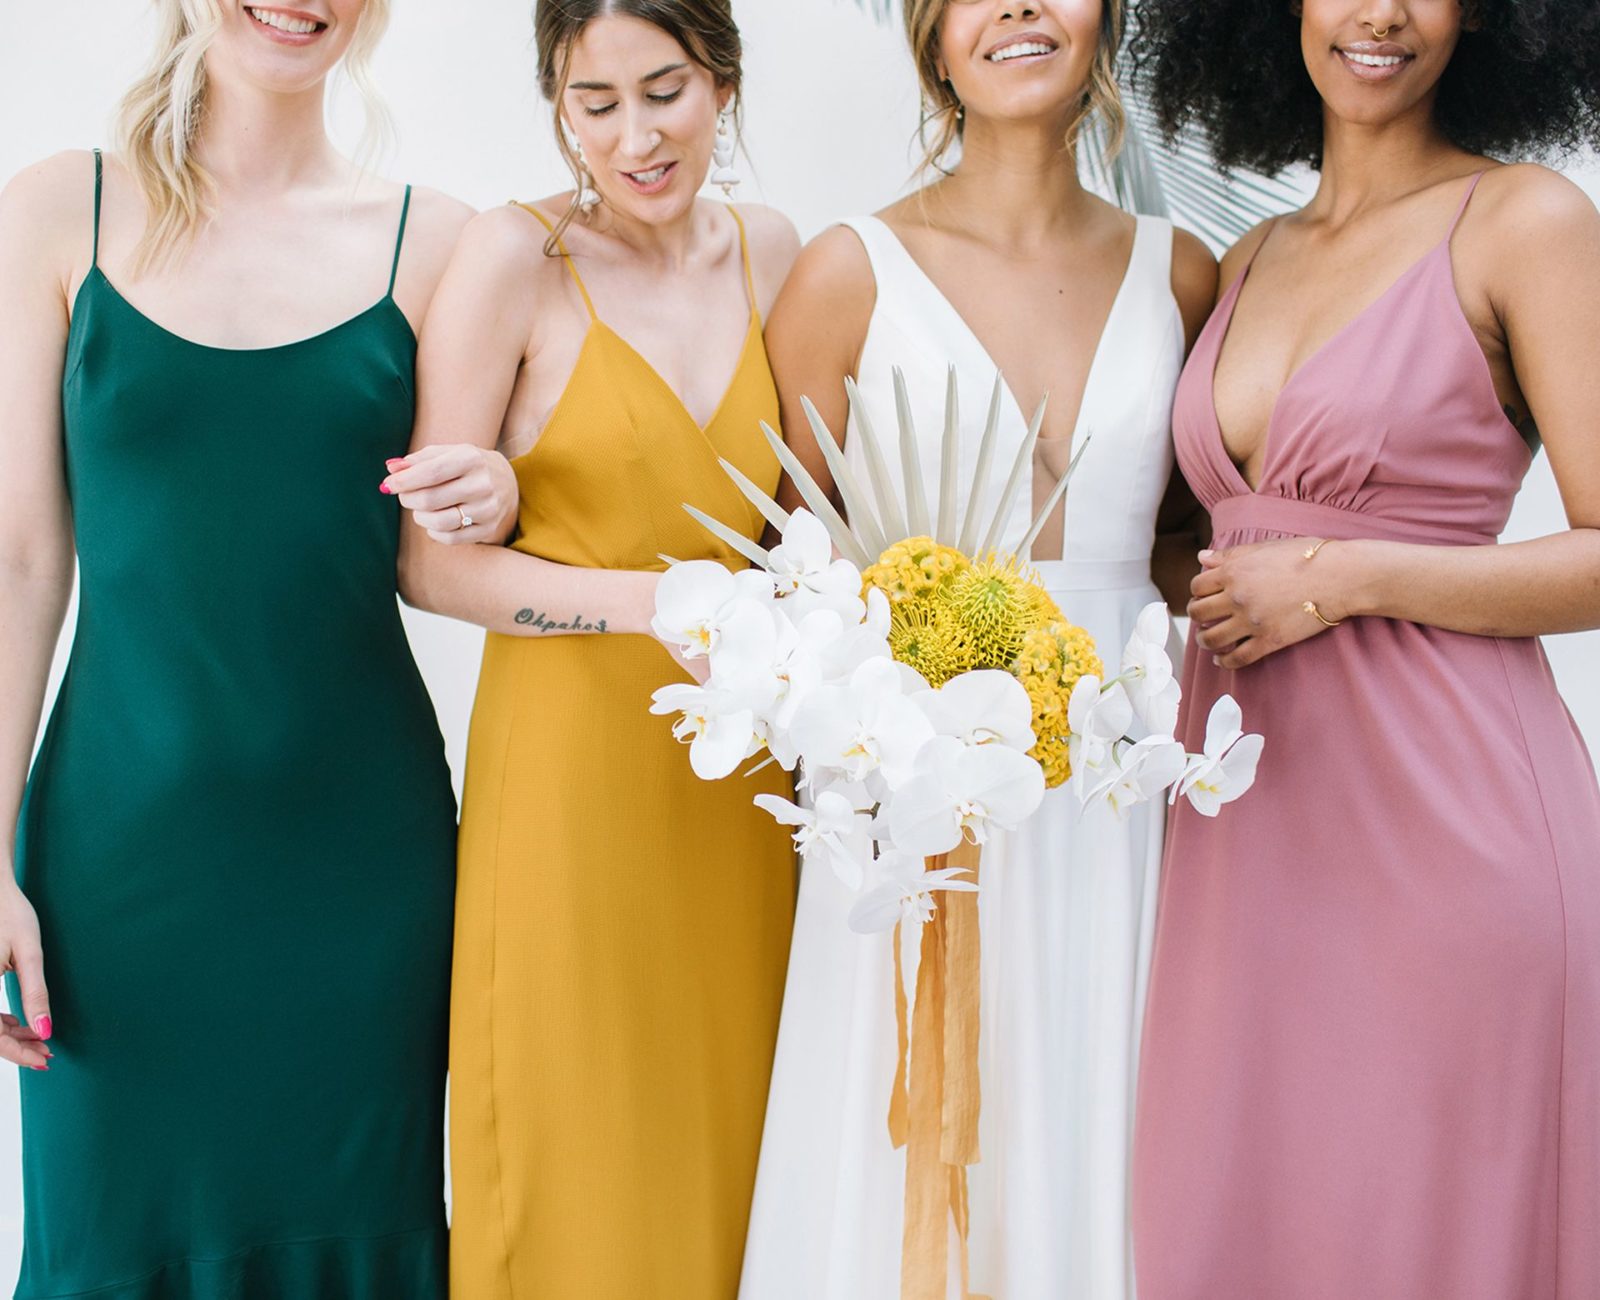 How to Mix & Match Bridesmaids Dresses - on the Bronte Bride Blog - different colour bridesmaids dresses, wedding inspiration, bridal party fashion